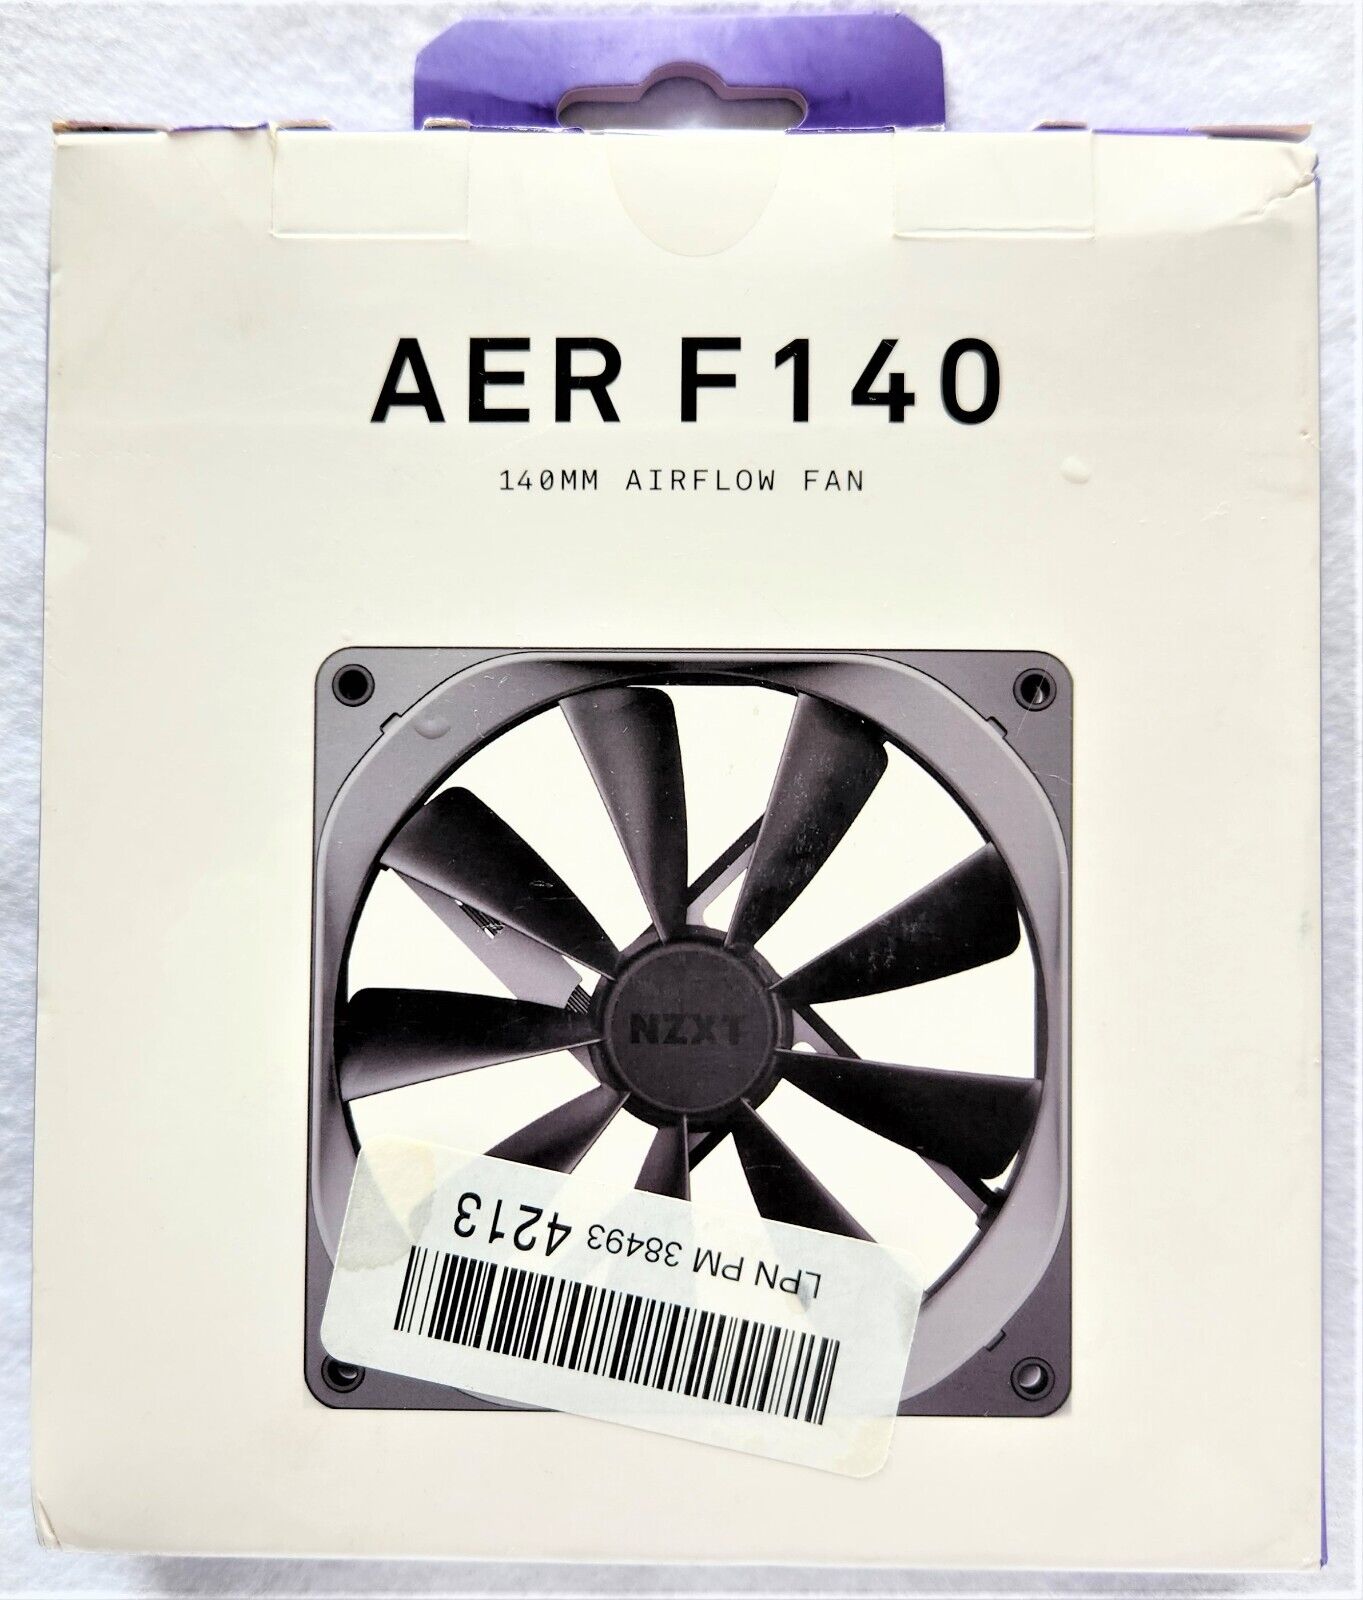 NZXT Performance Airflow Fan (AERF140) 140MM, Limited & one of the best fans